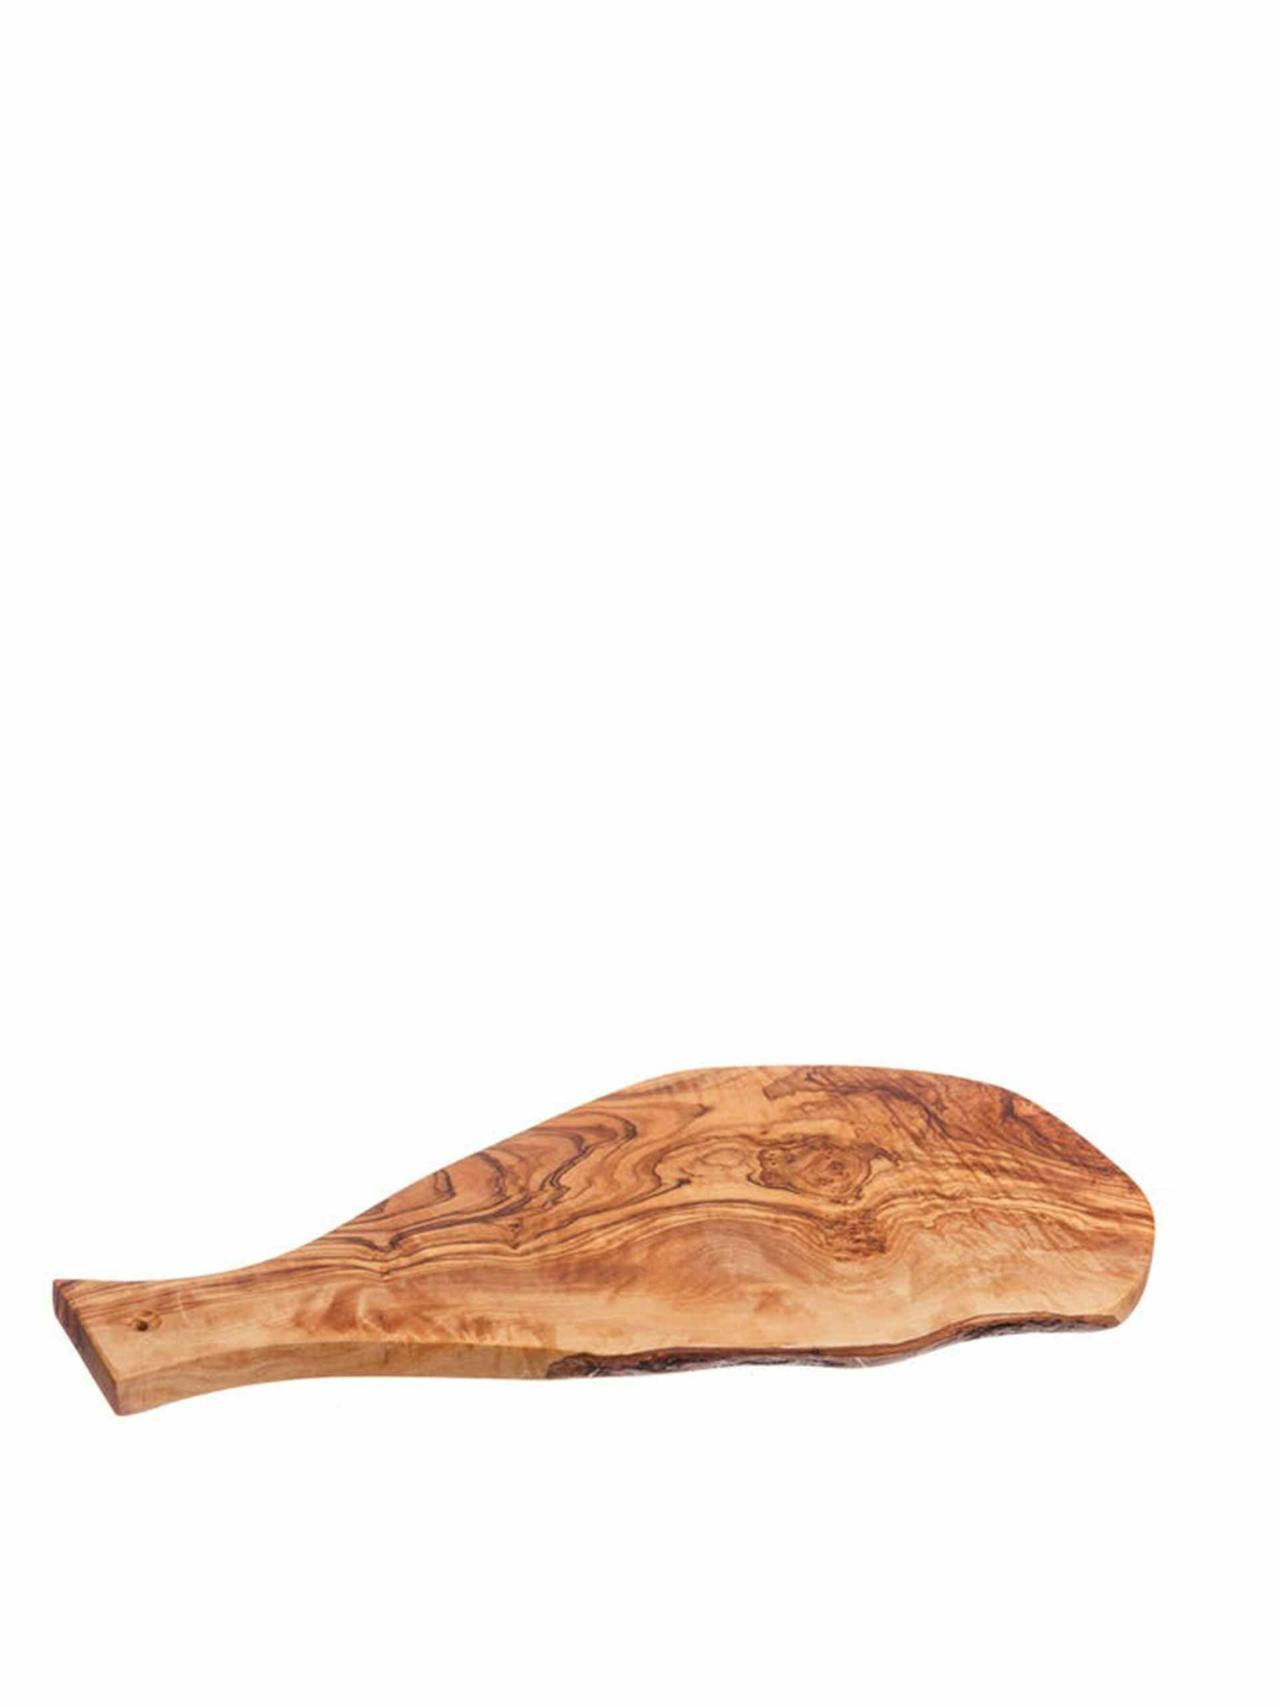 Naturally Med olive wood chopping board